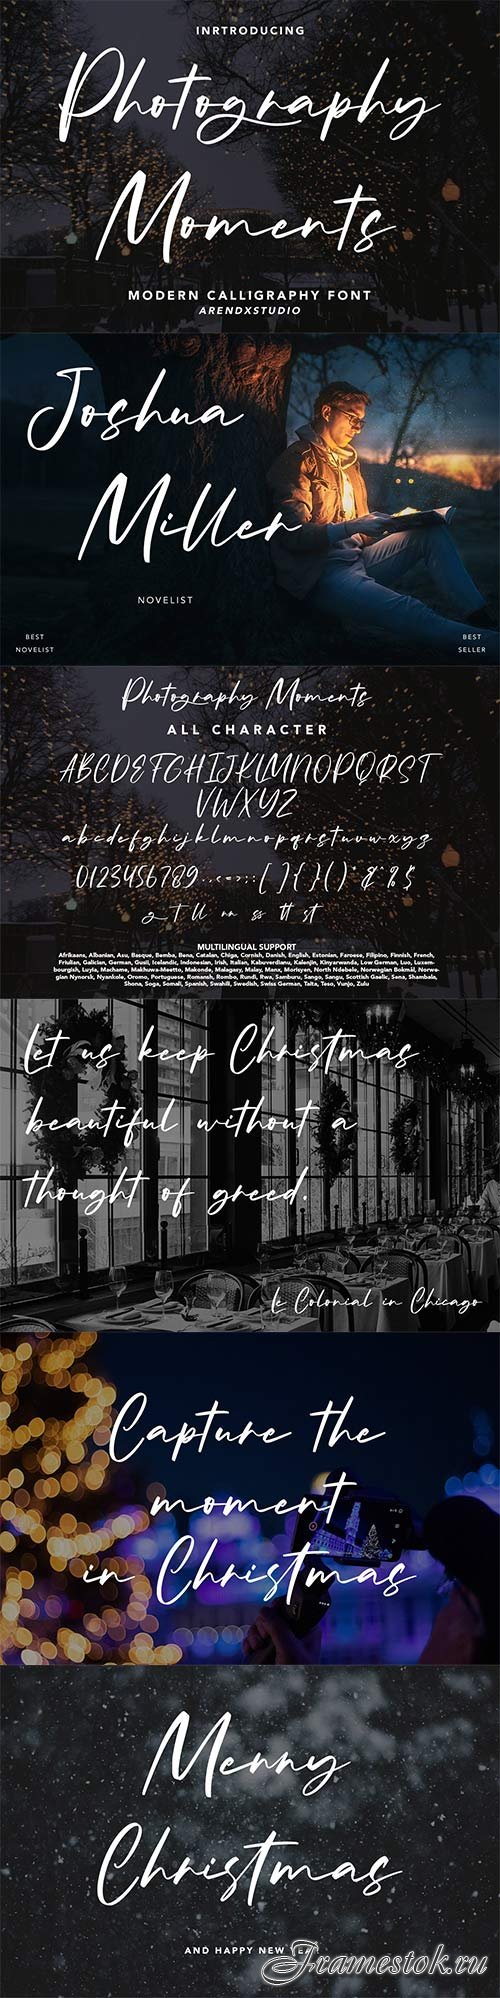 Photography Moments Modern Calligraphy Font